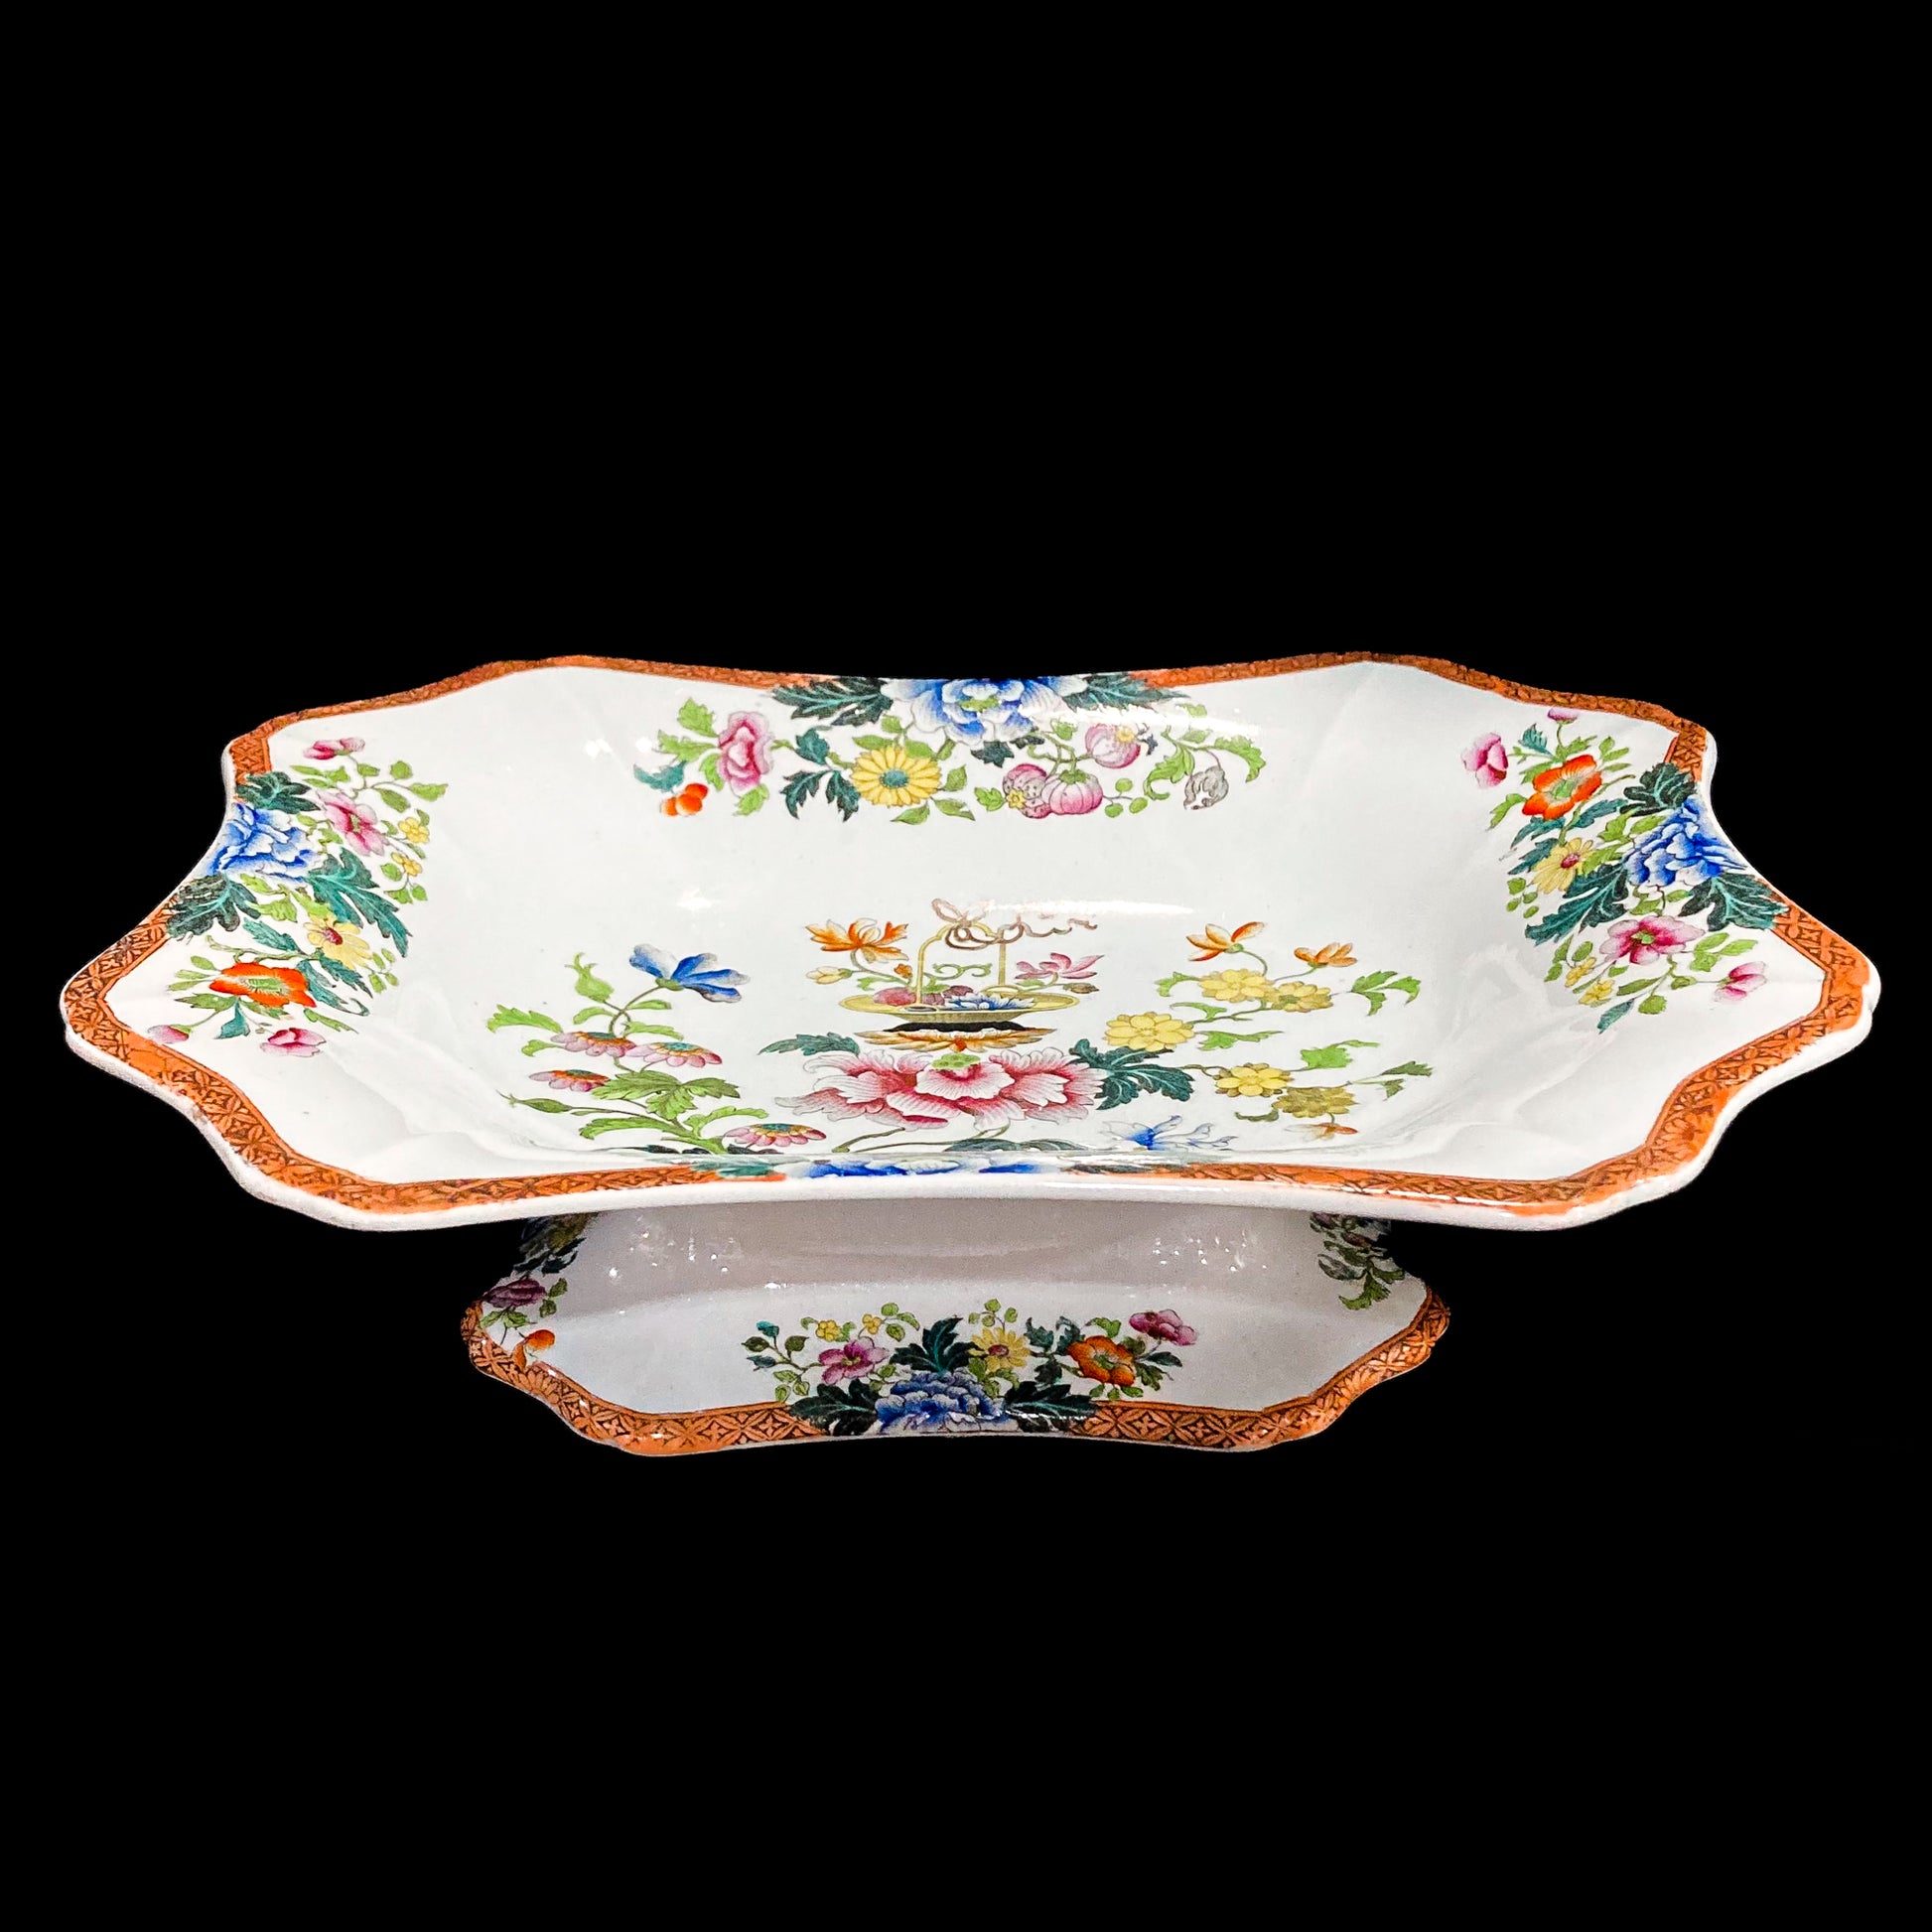 Antique 1850s Wedgwood Enameled Multicolor Floral Footed Compote Dish 2